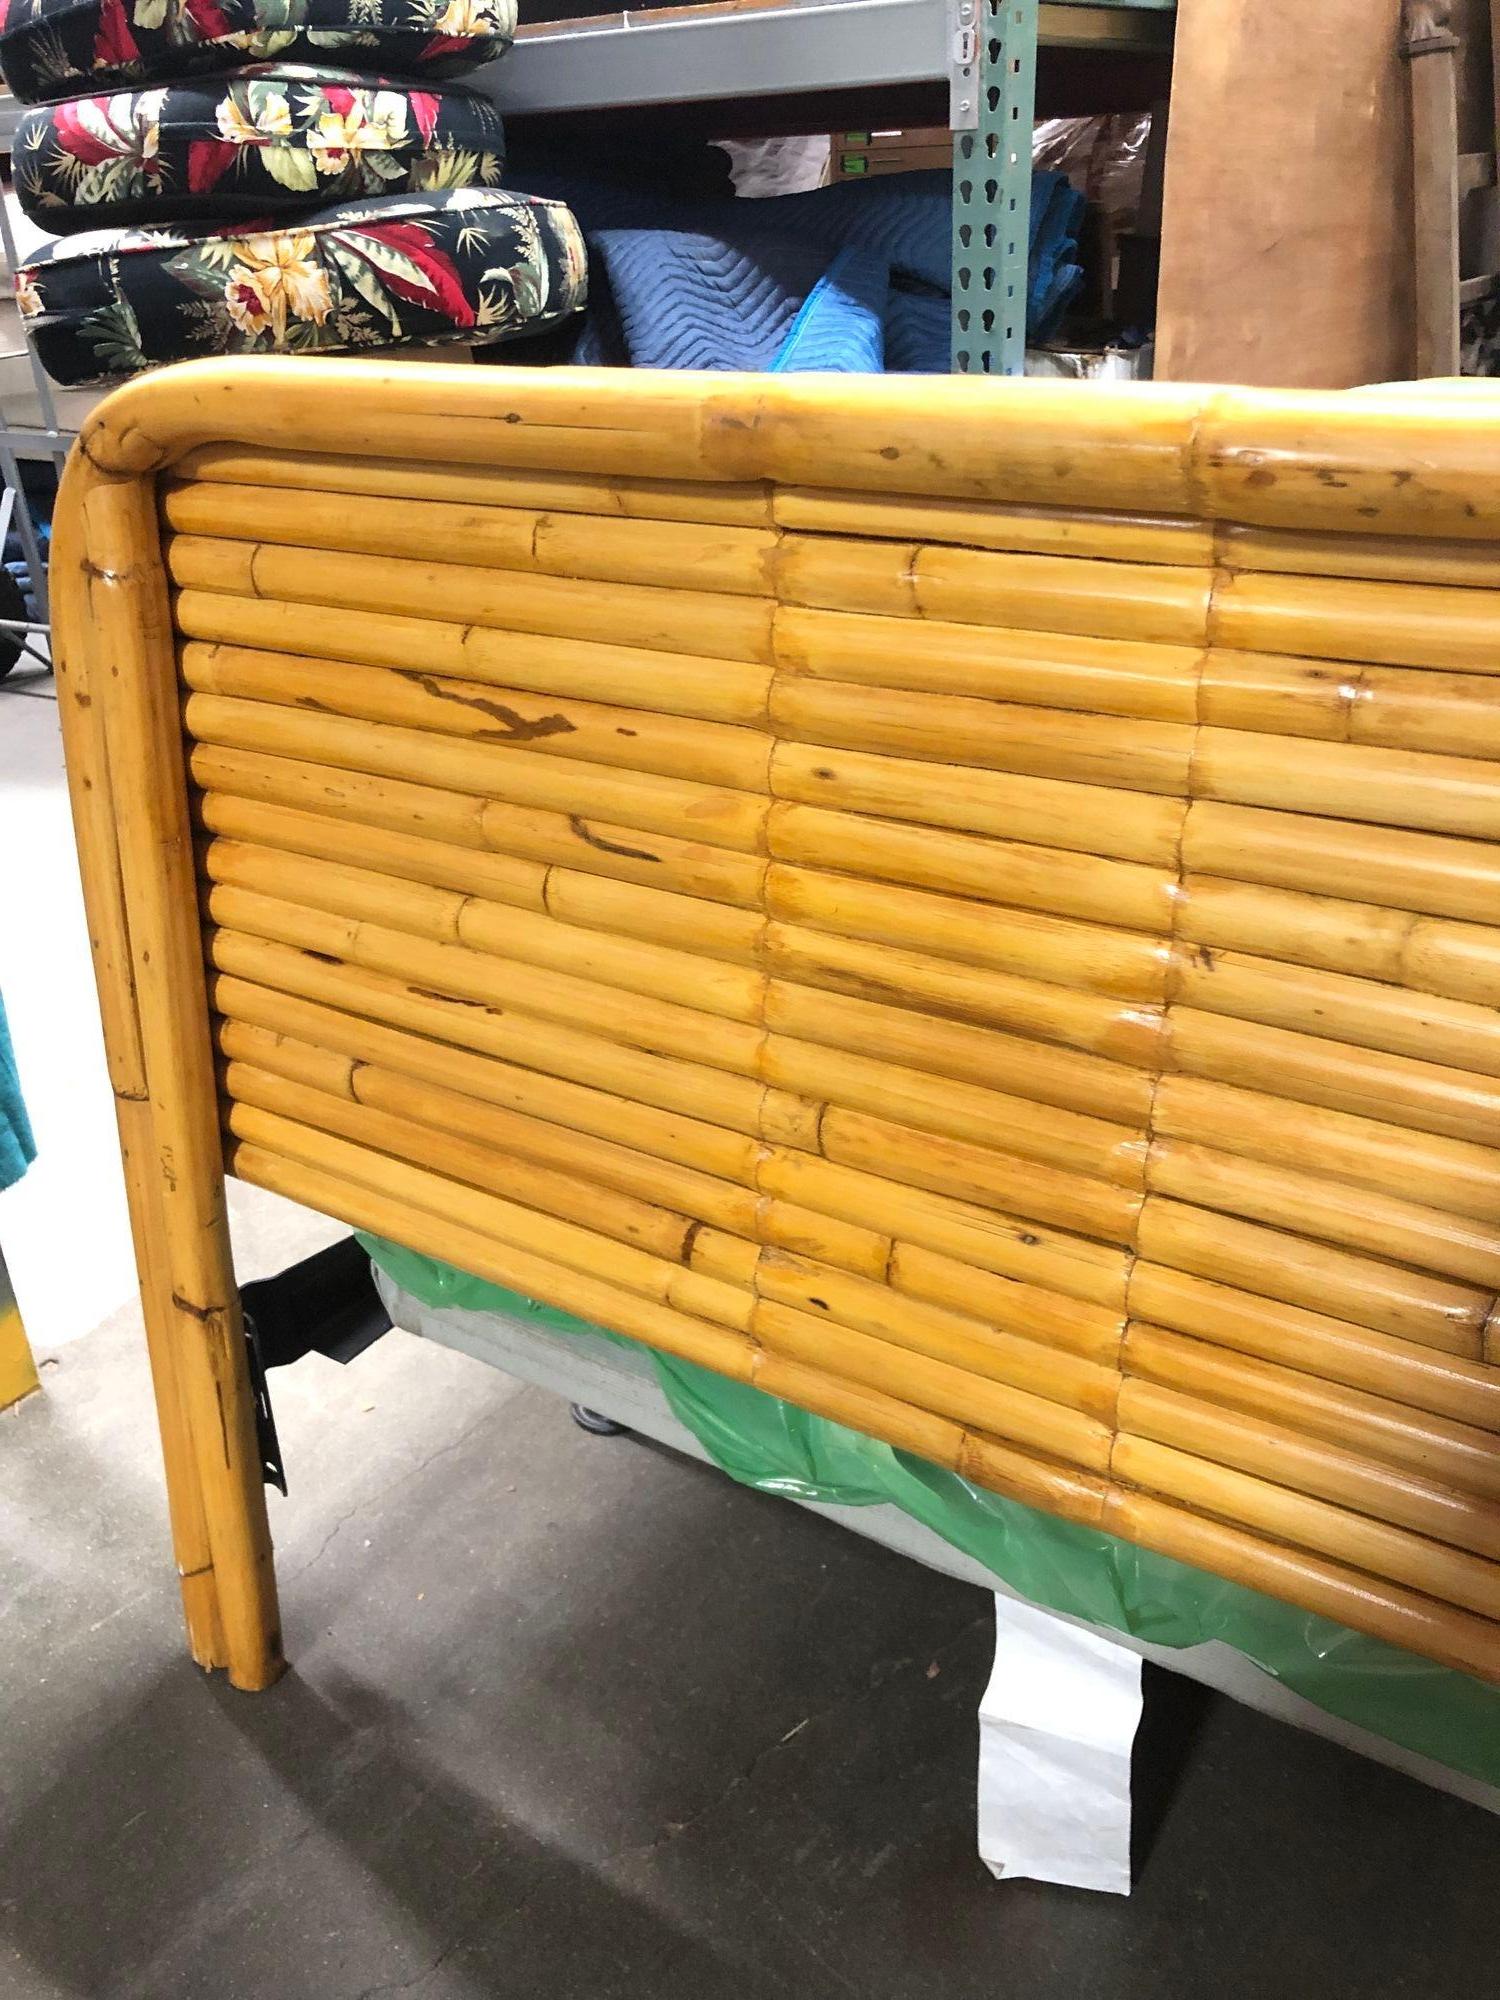 Pair of Mid-Century restored rattan beds. Each featuring a stacked headboard and foot board with a brand new Twin Ortho box spring mattress and mattress frame.

These headboards and foot boards are brand new from 1948 and haven't been